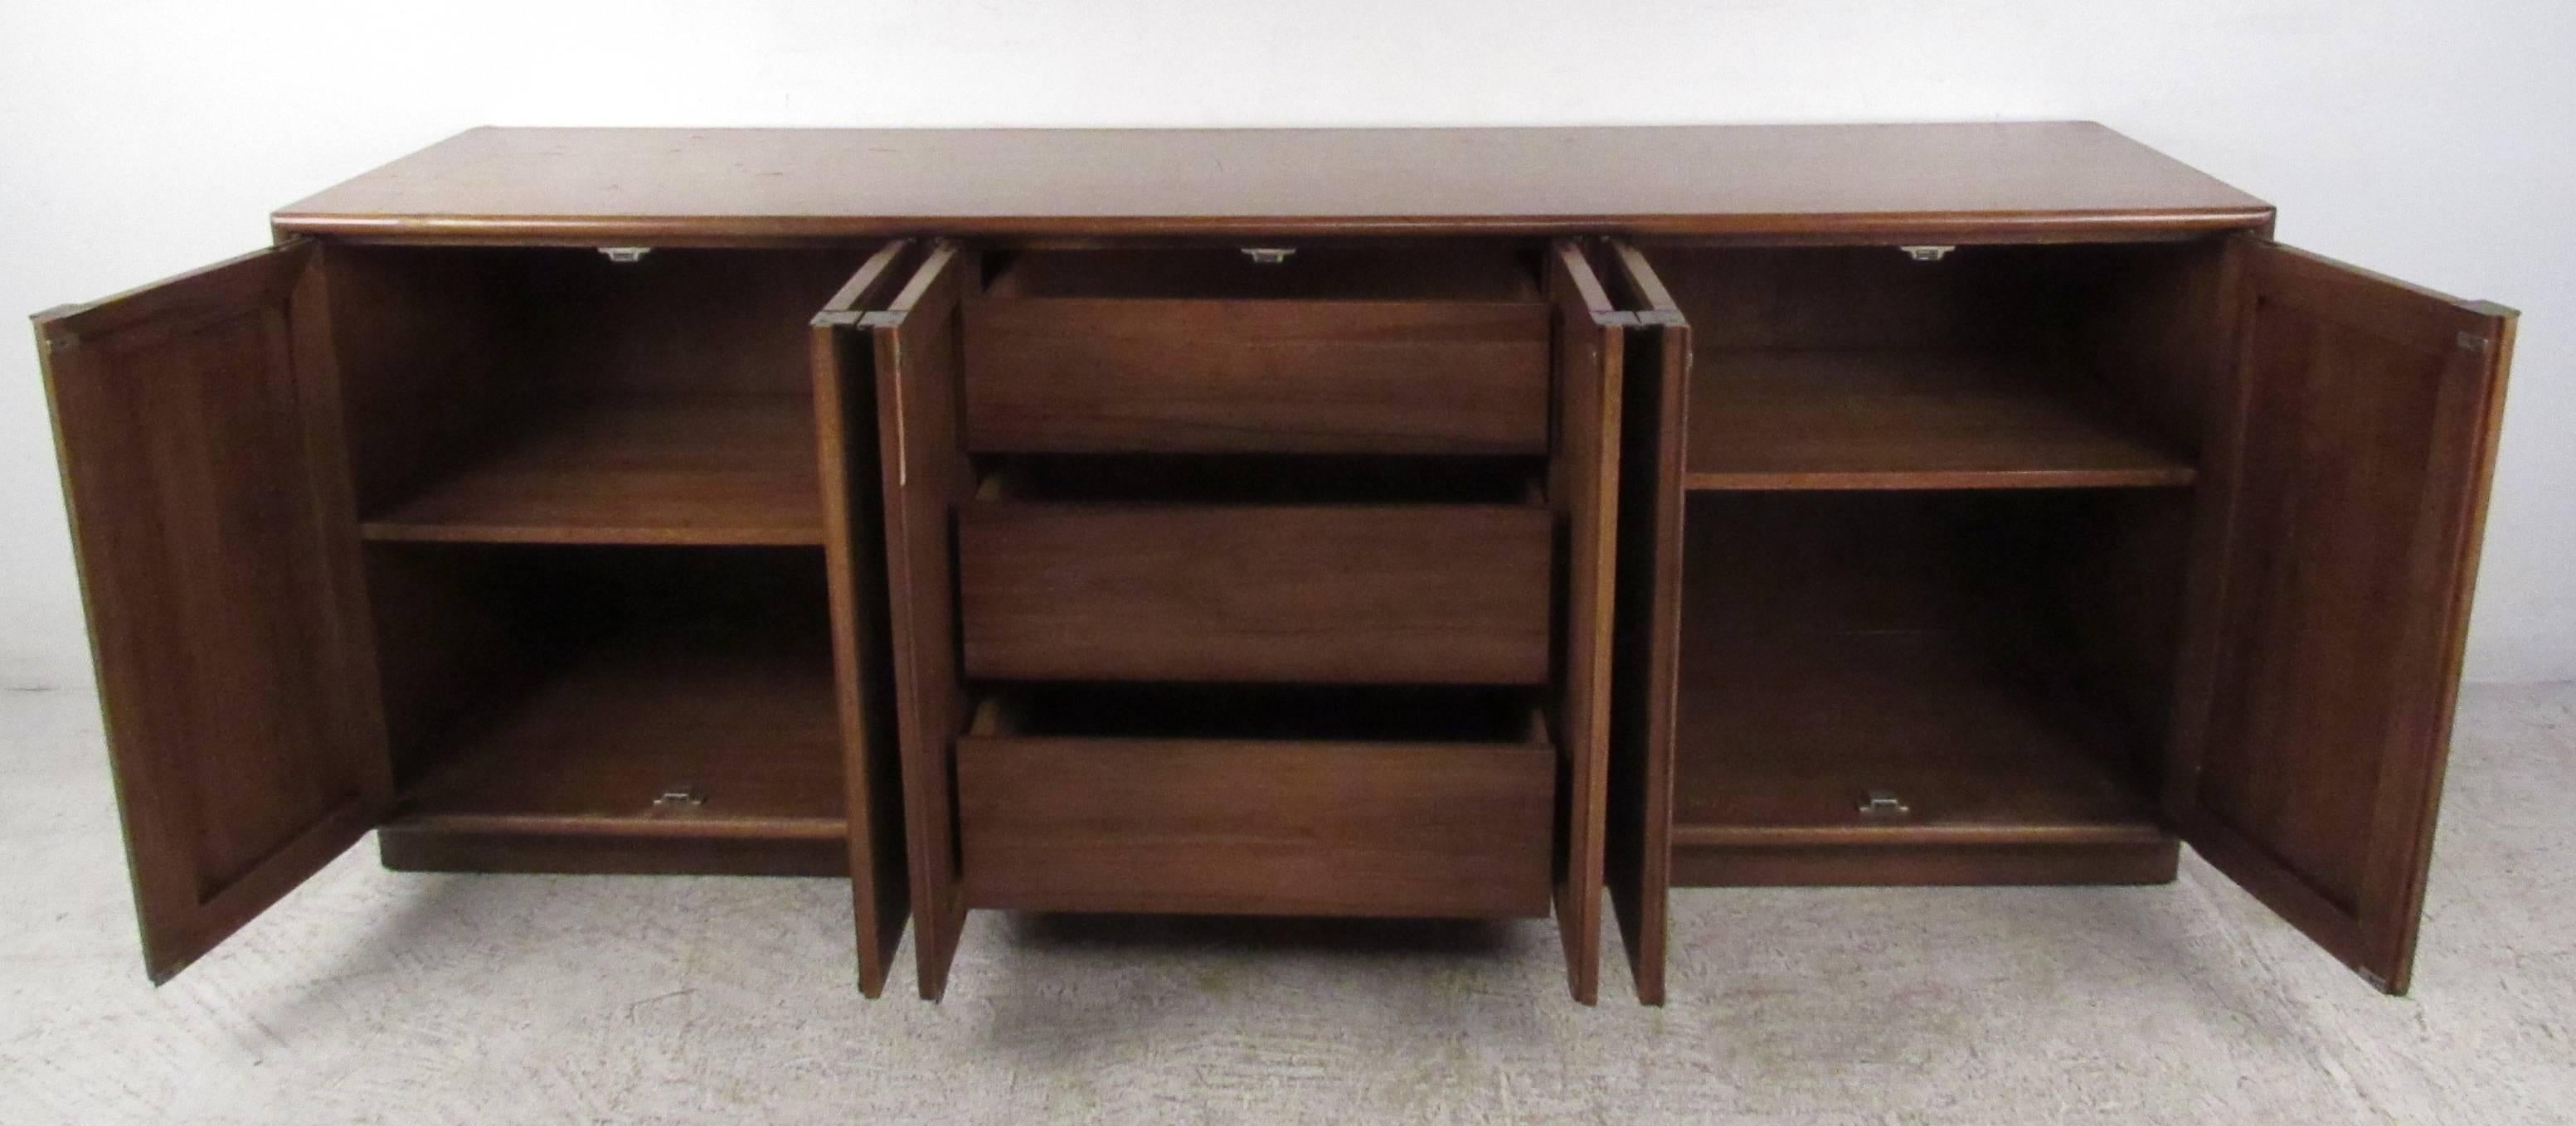 Vintage-modern sideboard featuring cane front with interior drawers and shelving, designed by John Stuart.

Please confirm item location NY or NJ with dealer.